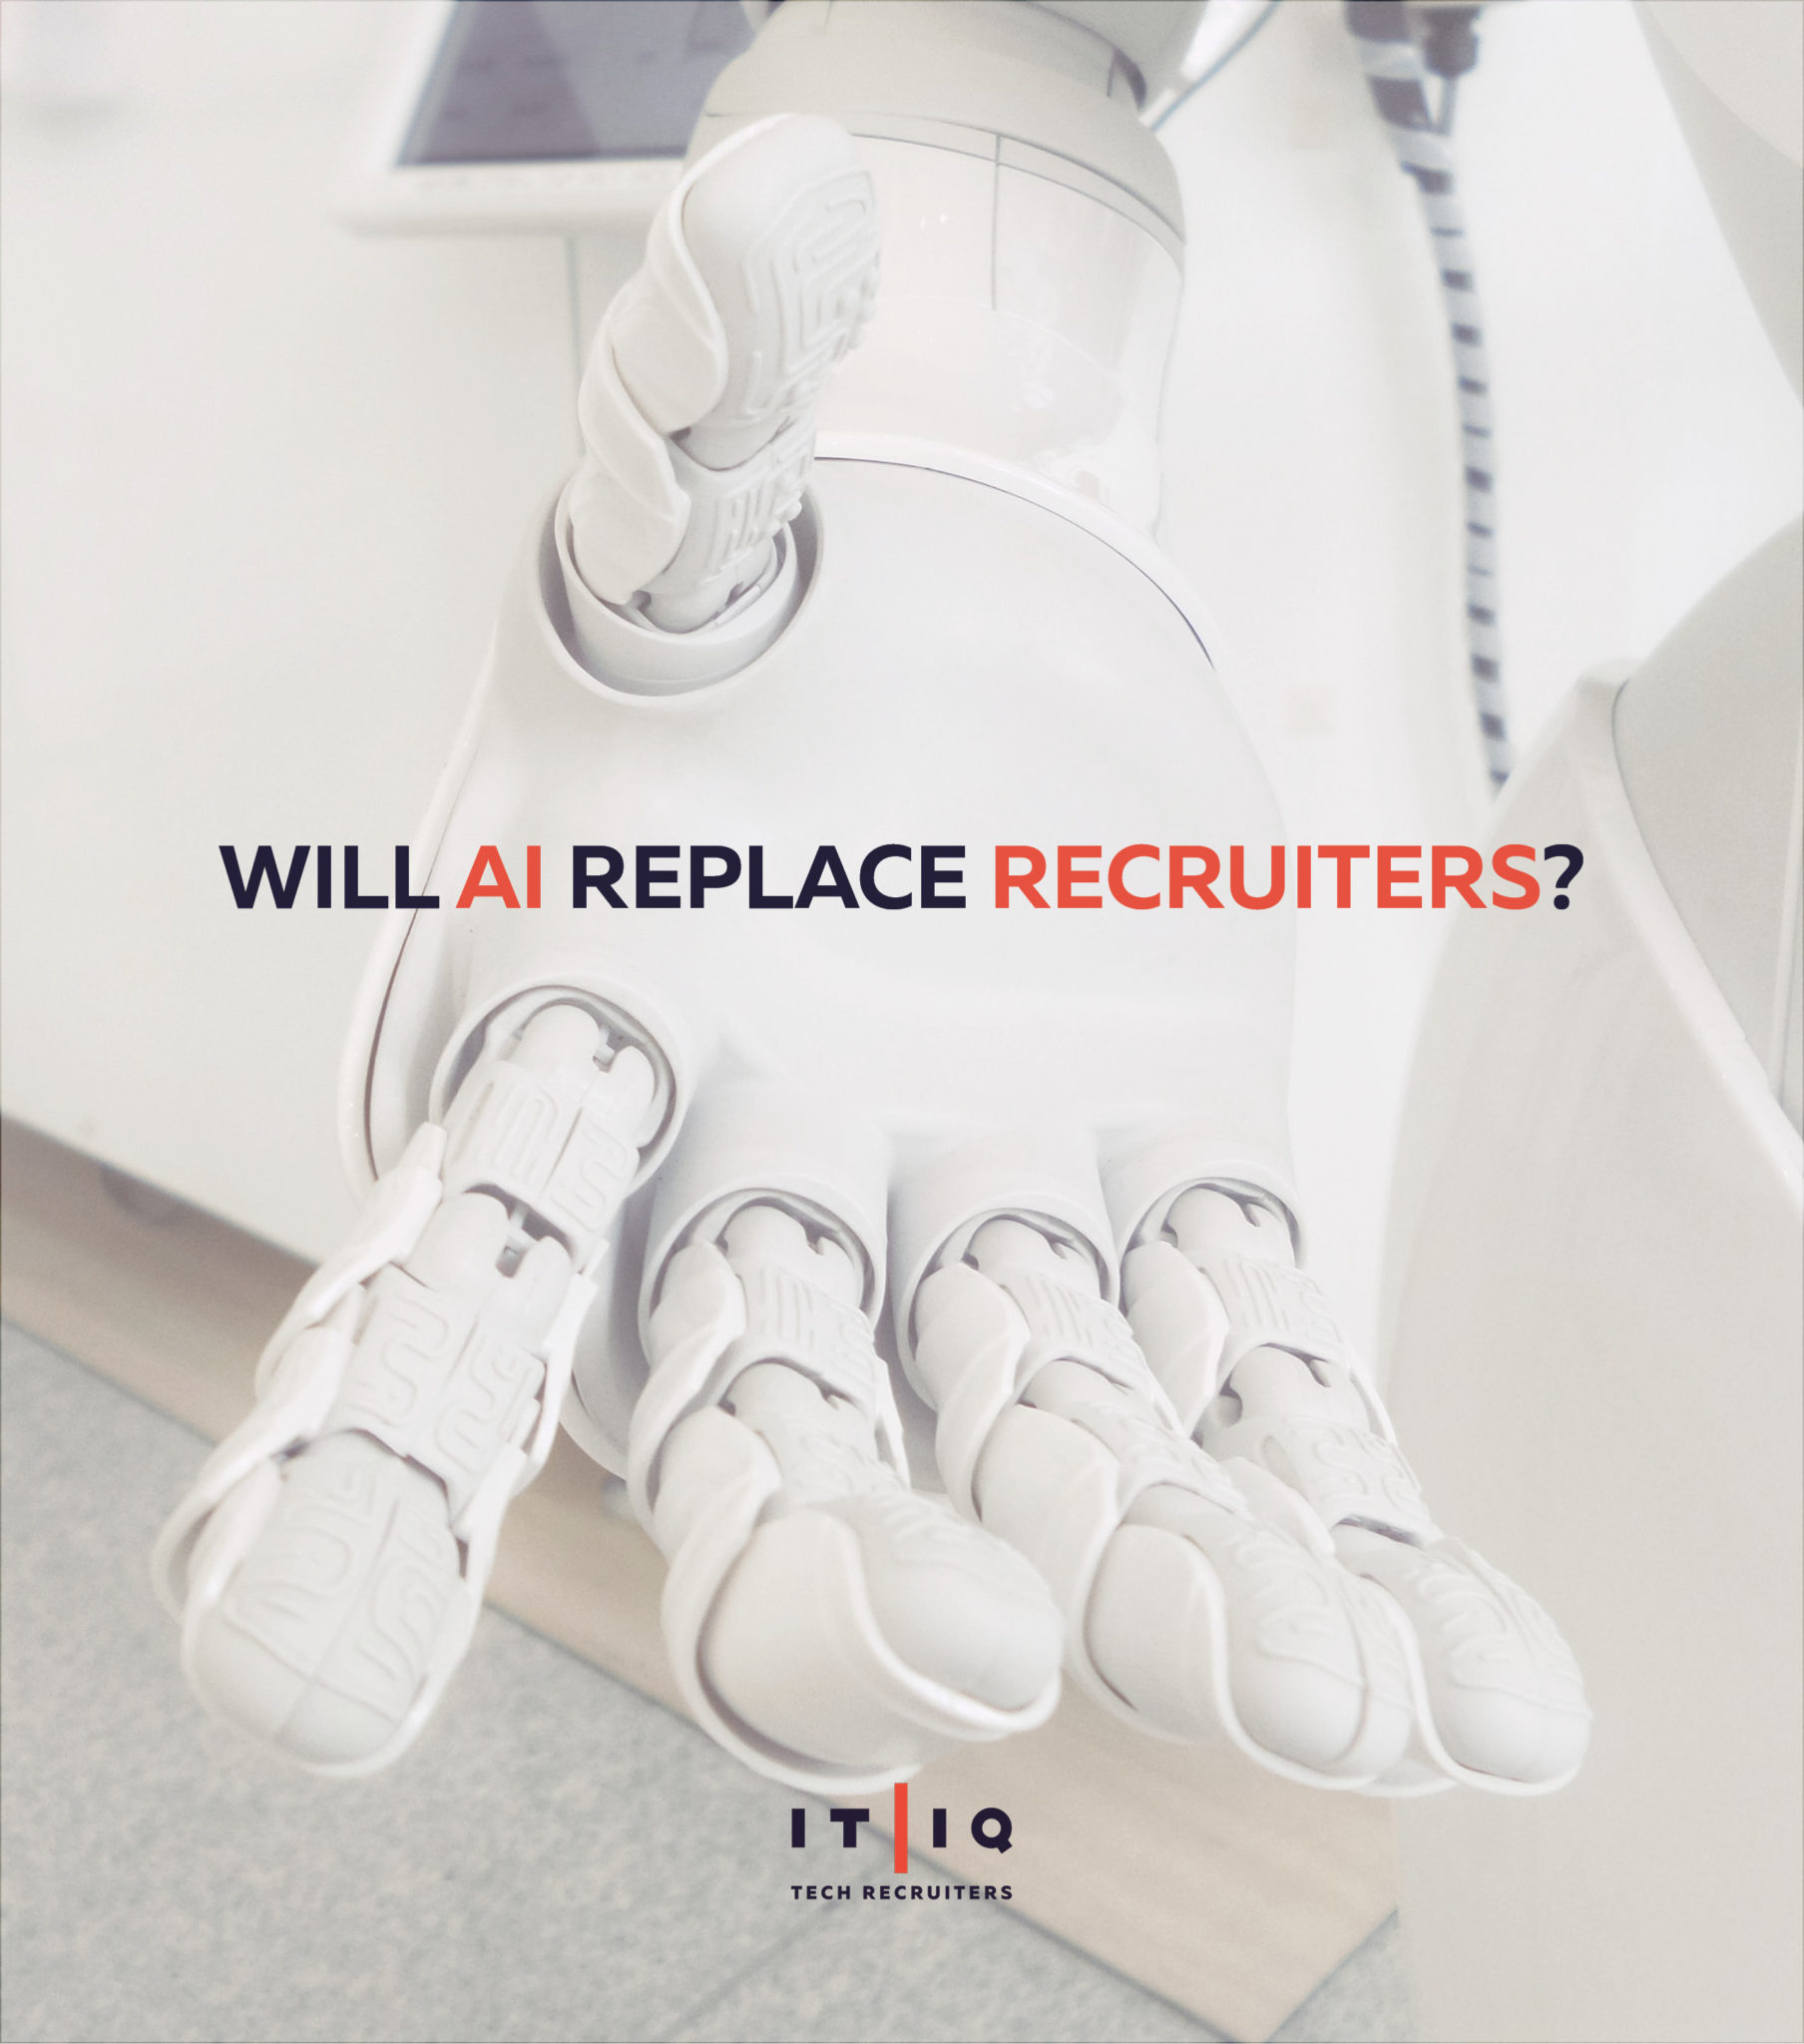 IT/IQ Tech Recruiters Will AI Replace Recruiters, Background image features white robotic hand extended to viewer